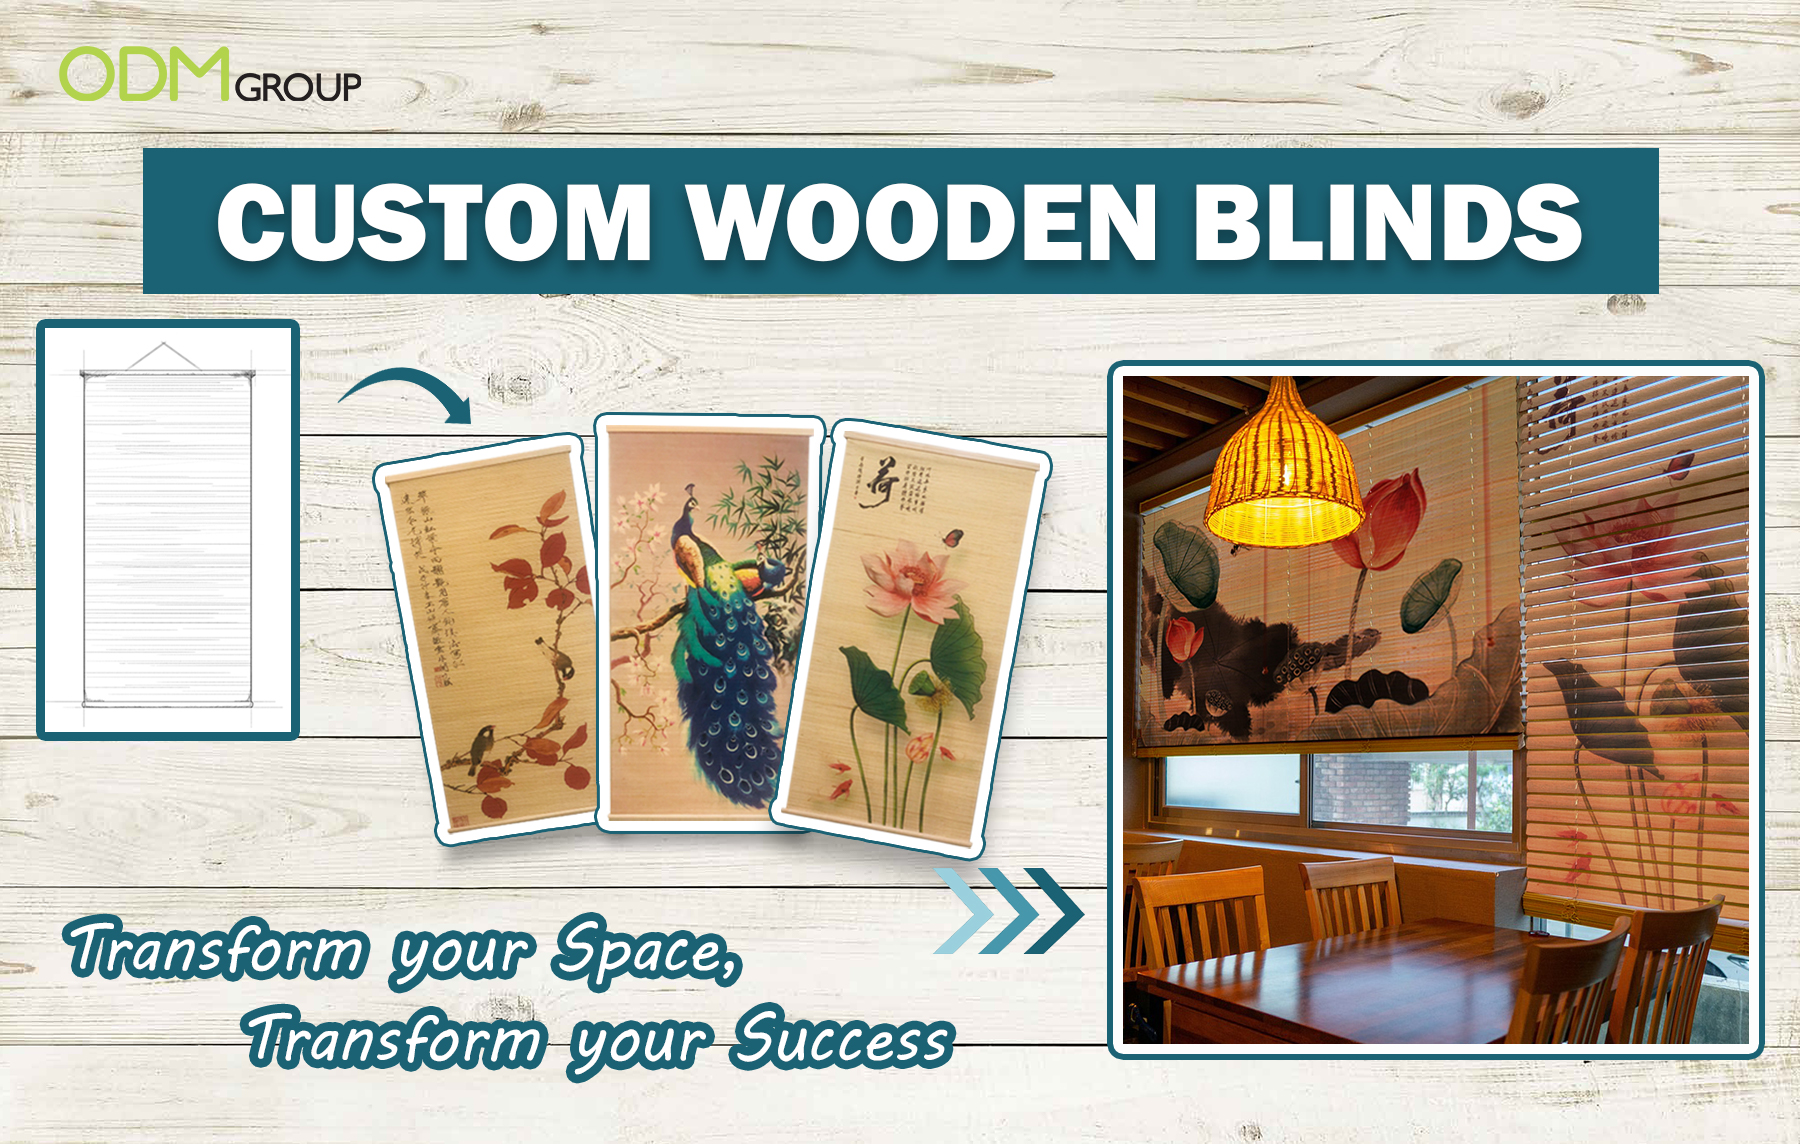 Custom wooden blinds with artistic designs, perfect for transforming office spaces.